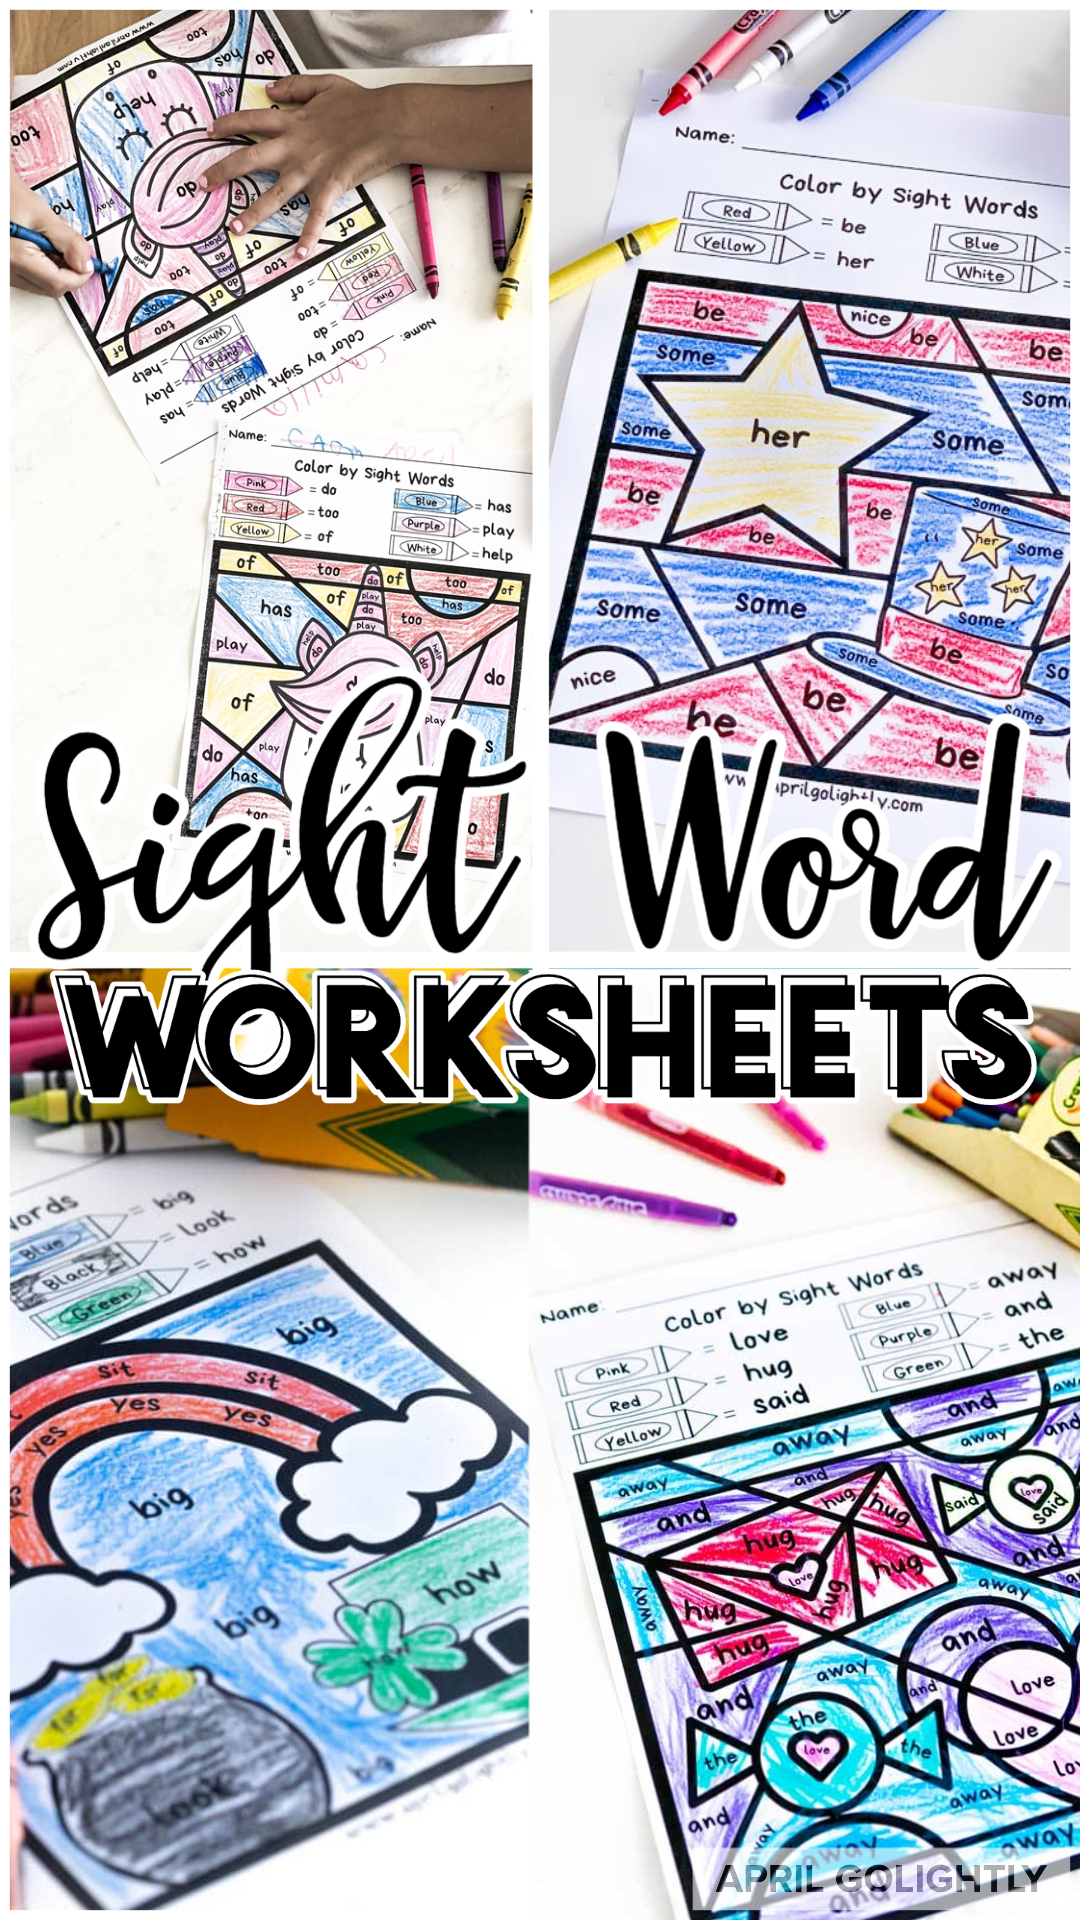 Sight Word Worksheets